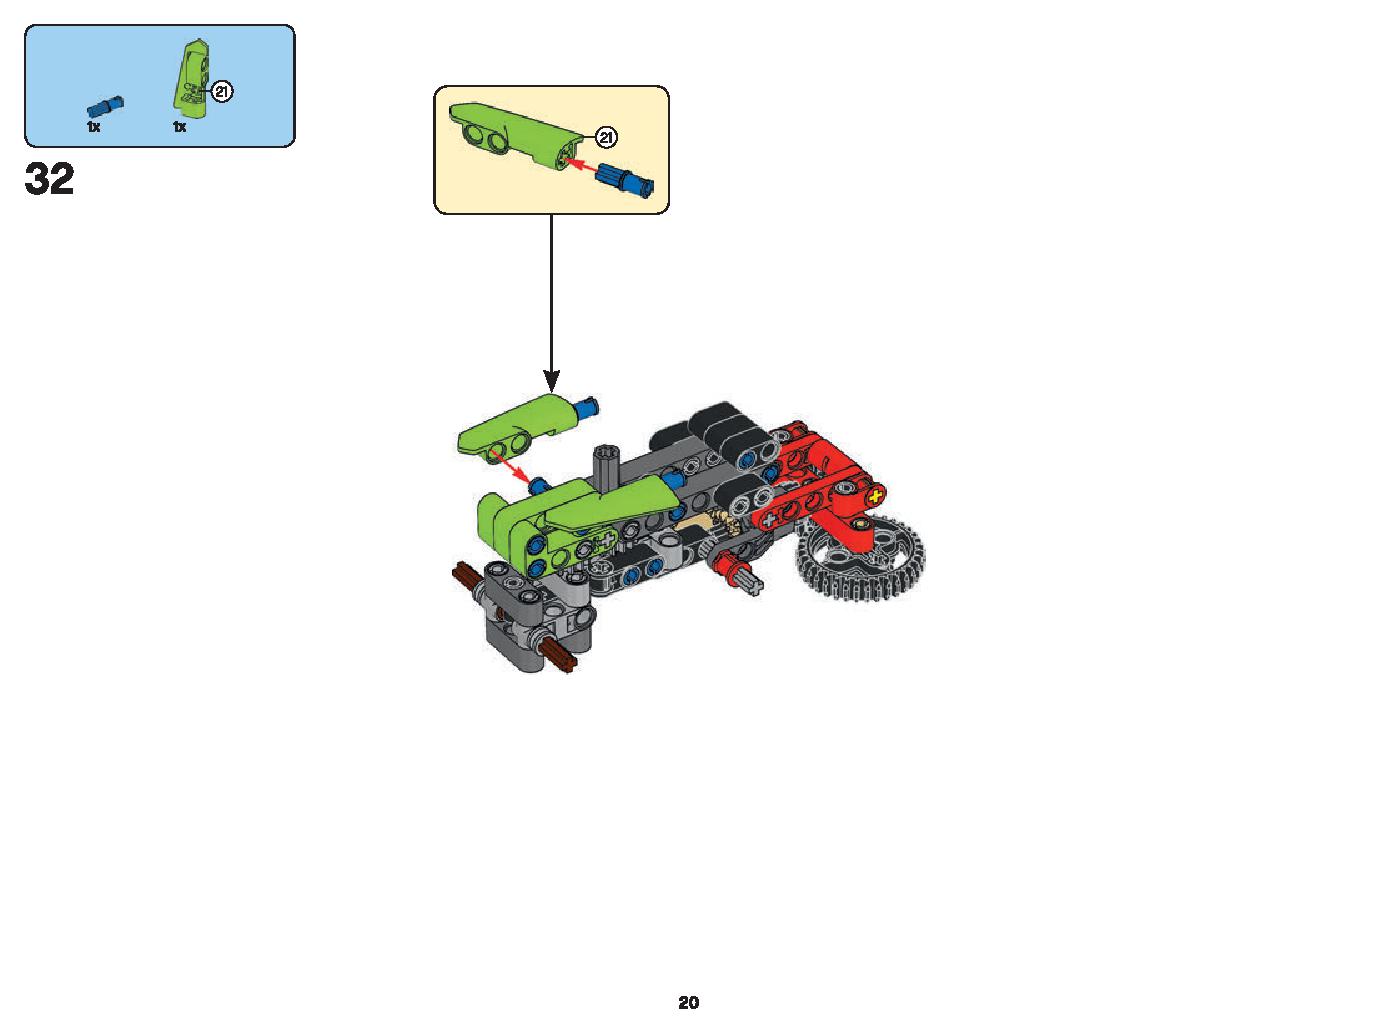 Mini CLAAS XERION 42102 LEGO information LEGO instructions 20 page